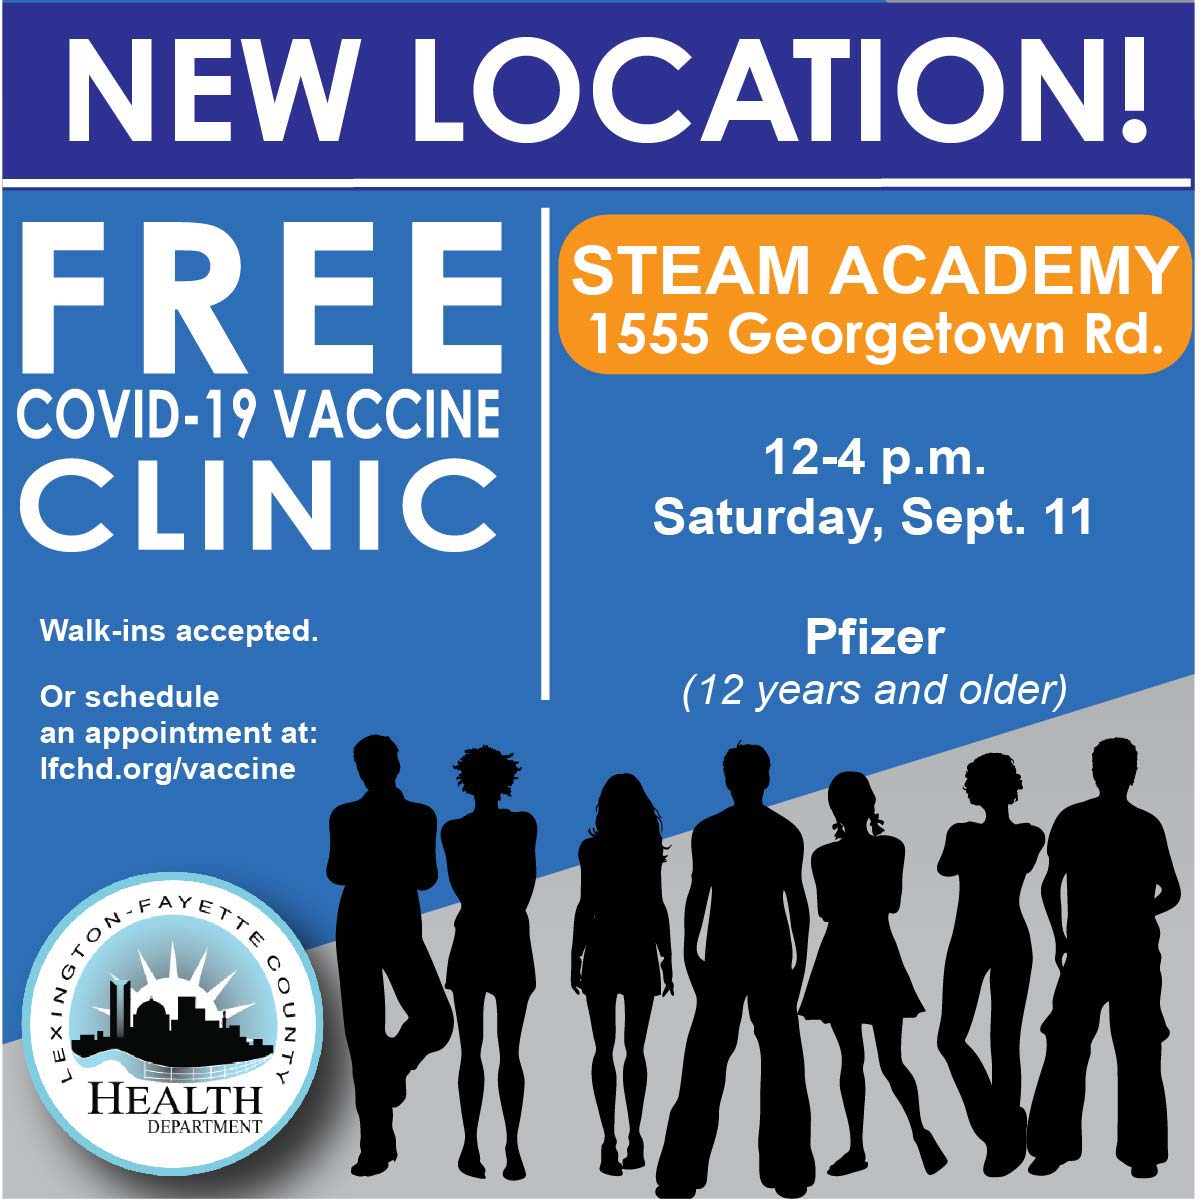 Special COVID-19 vaccination clinic scheduled for Sept. 11